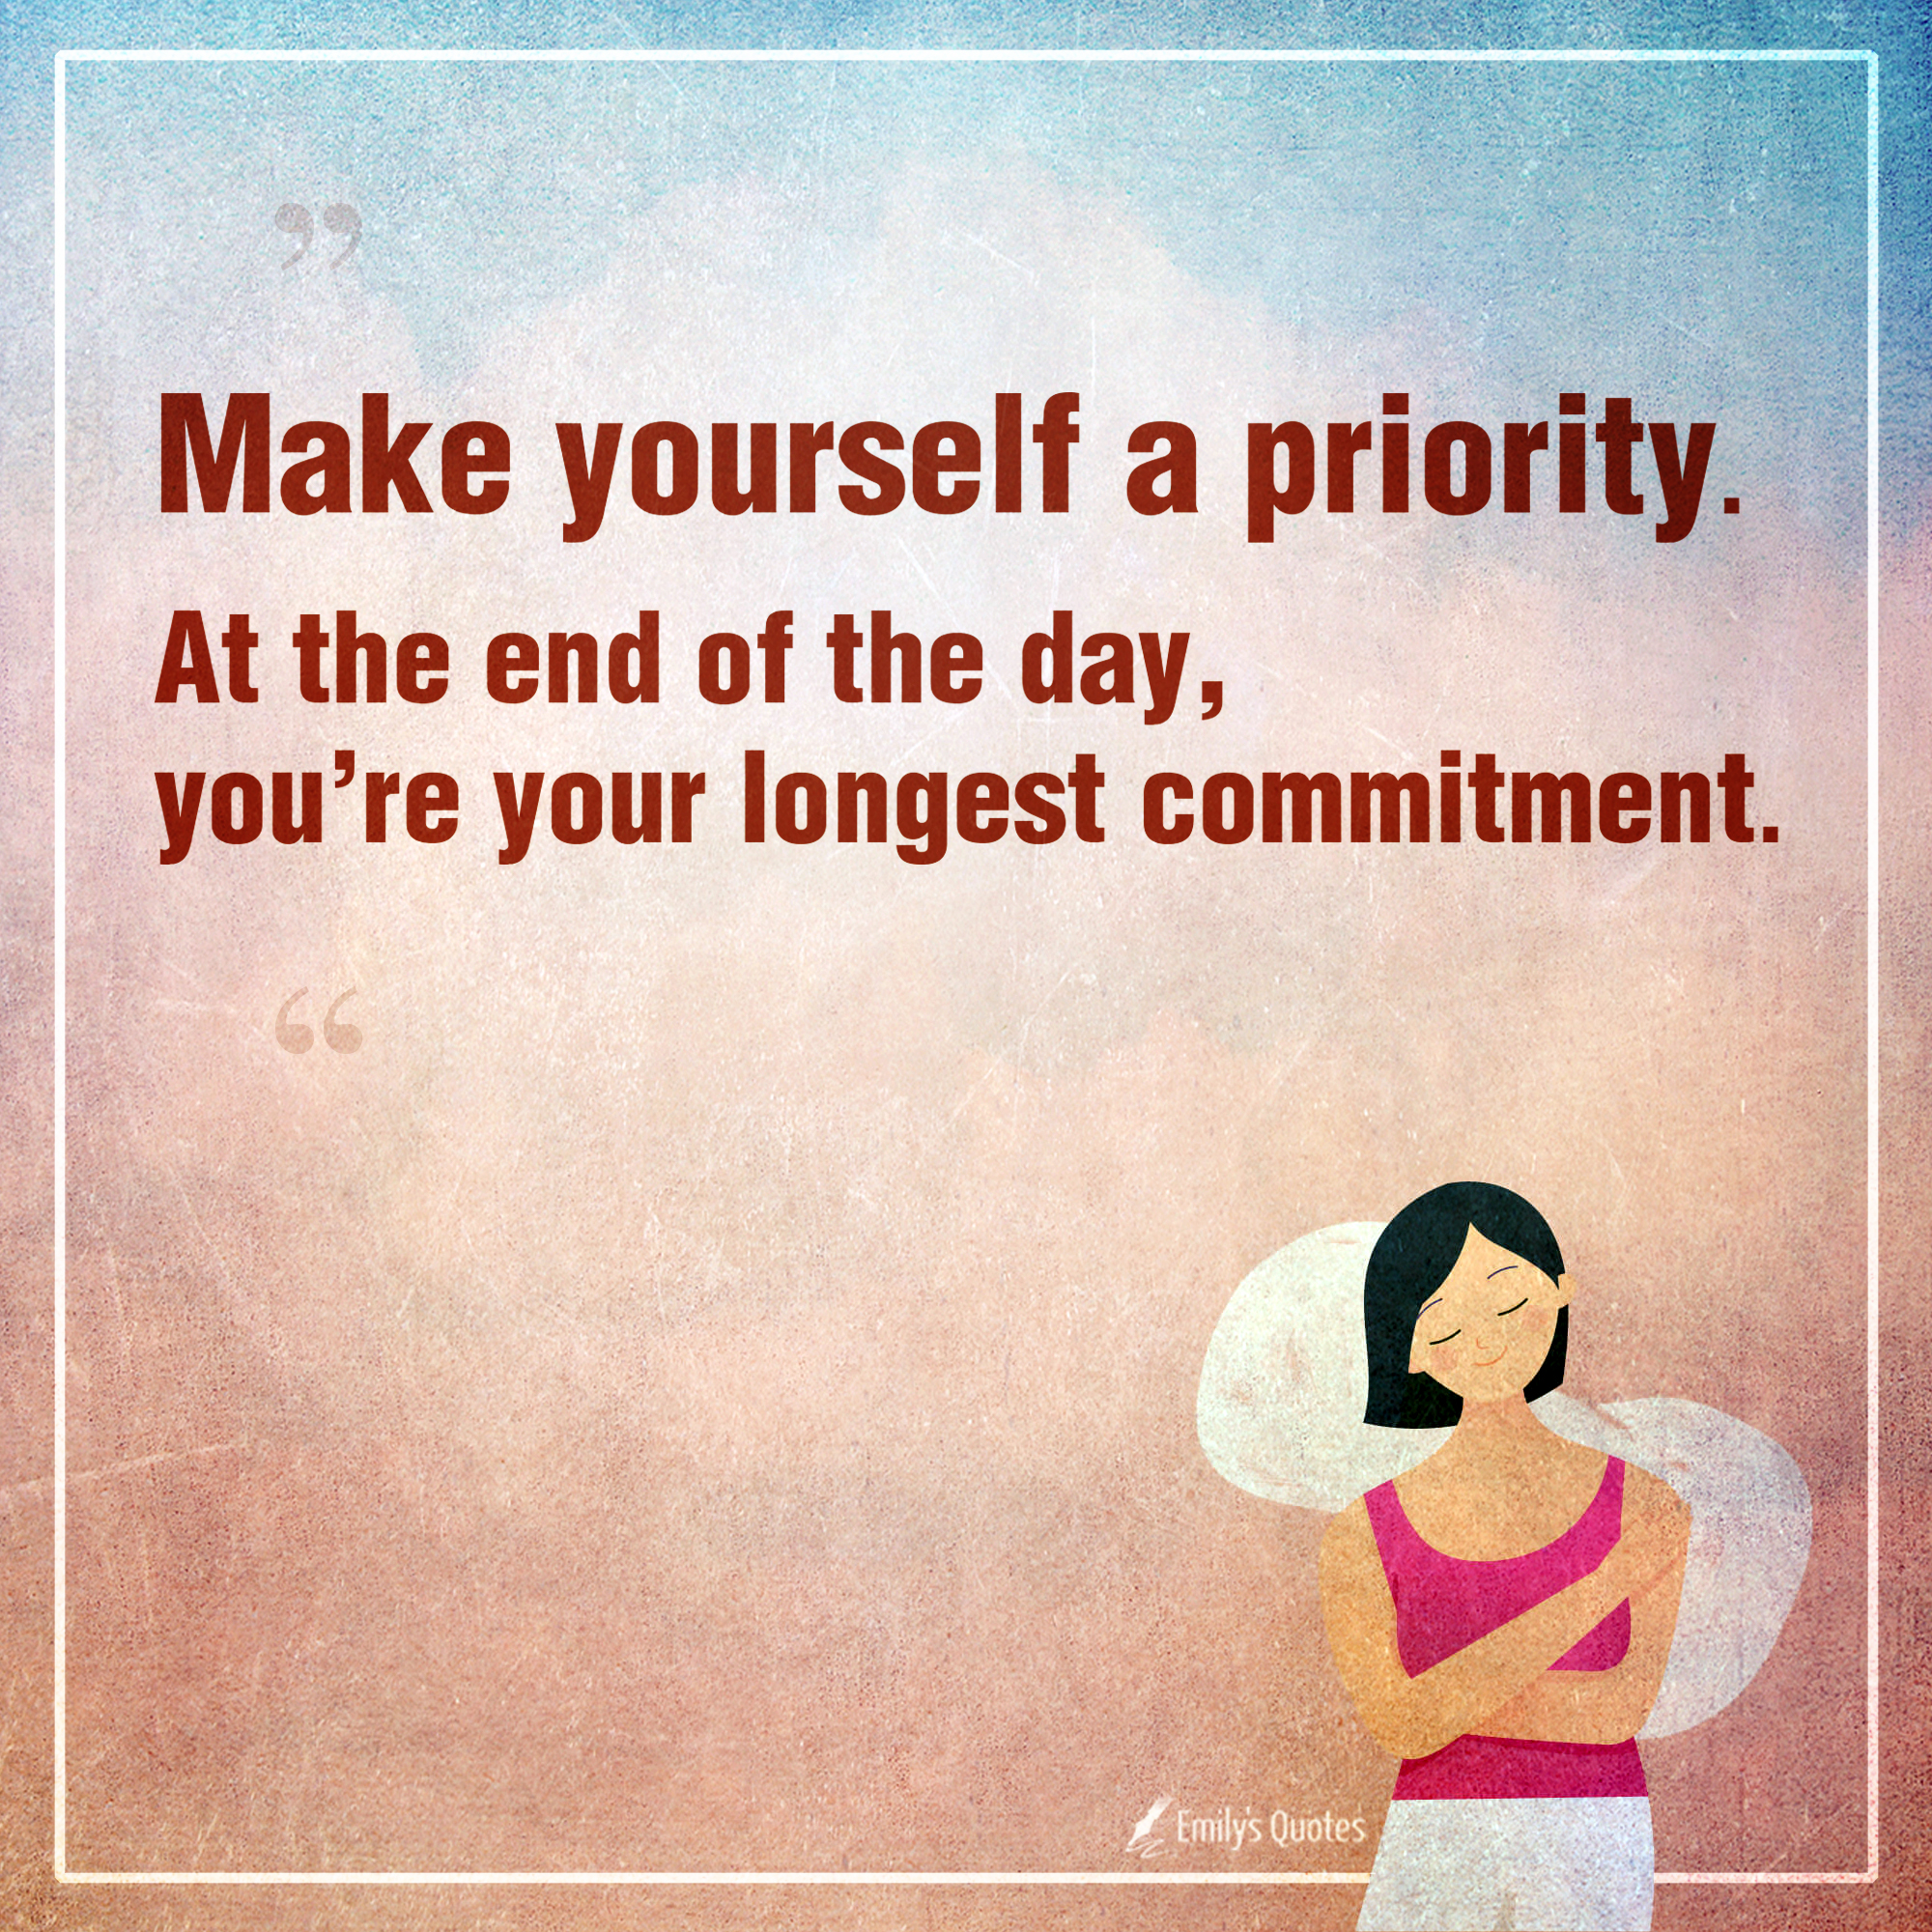 Stay committed to yourself and your growth.